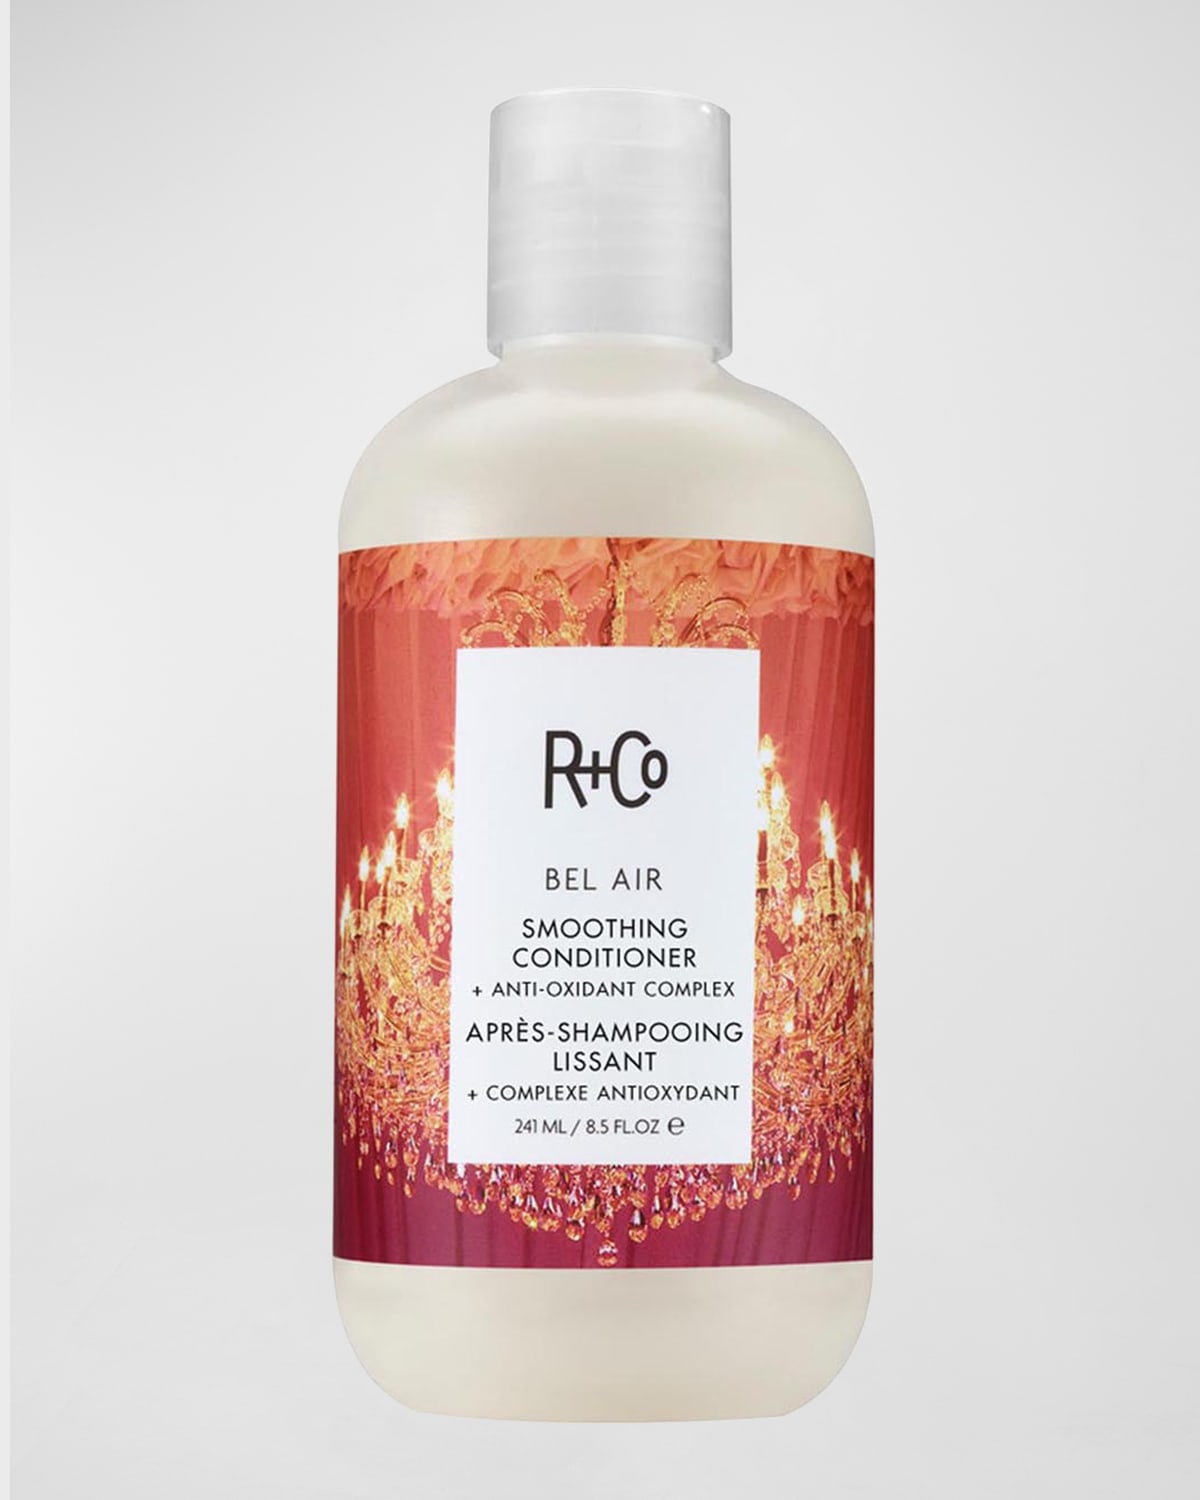 8.5 oz. BEL AIR Smoothing Conditioner + Anti-Oxidant Complex